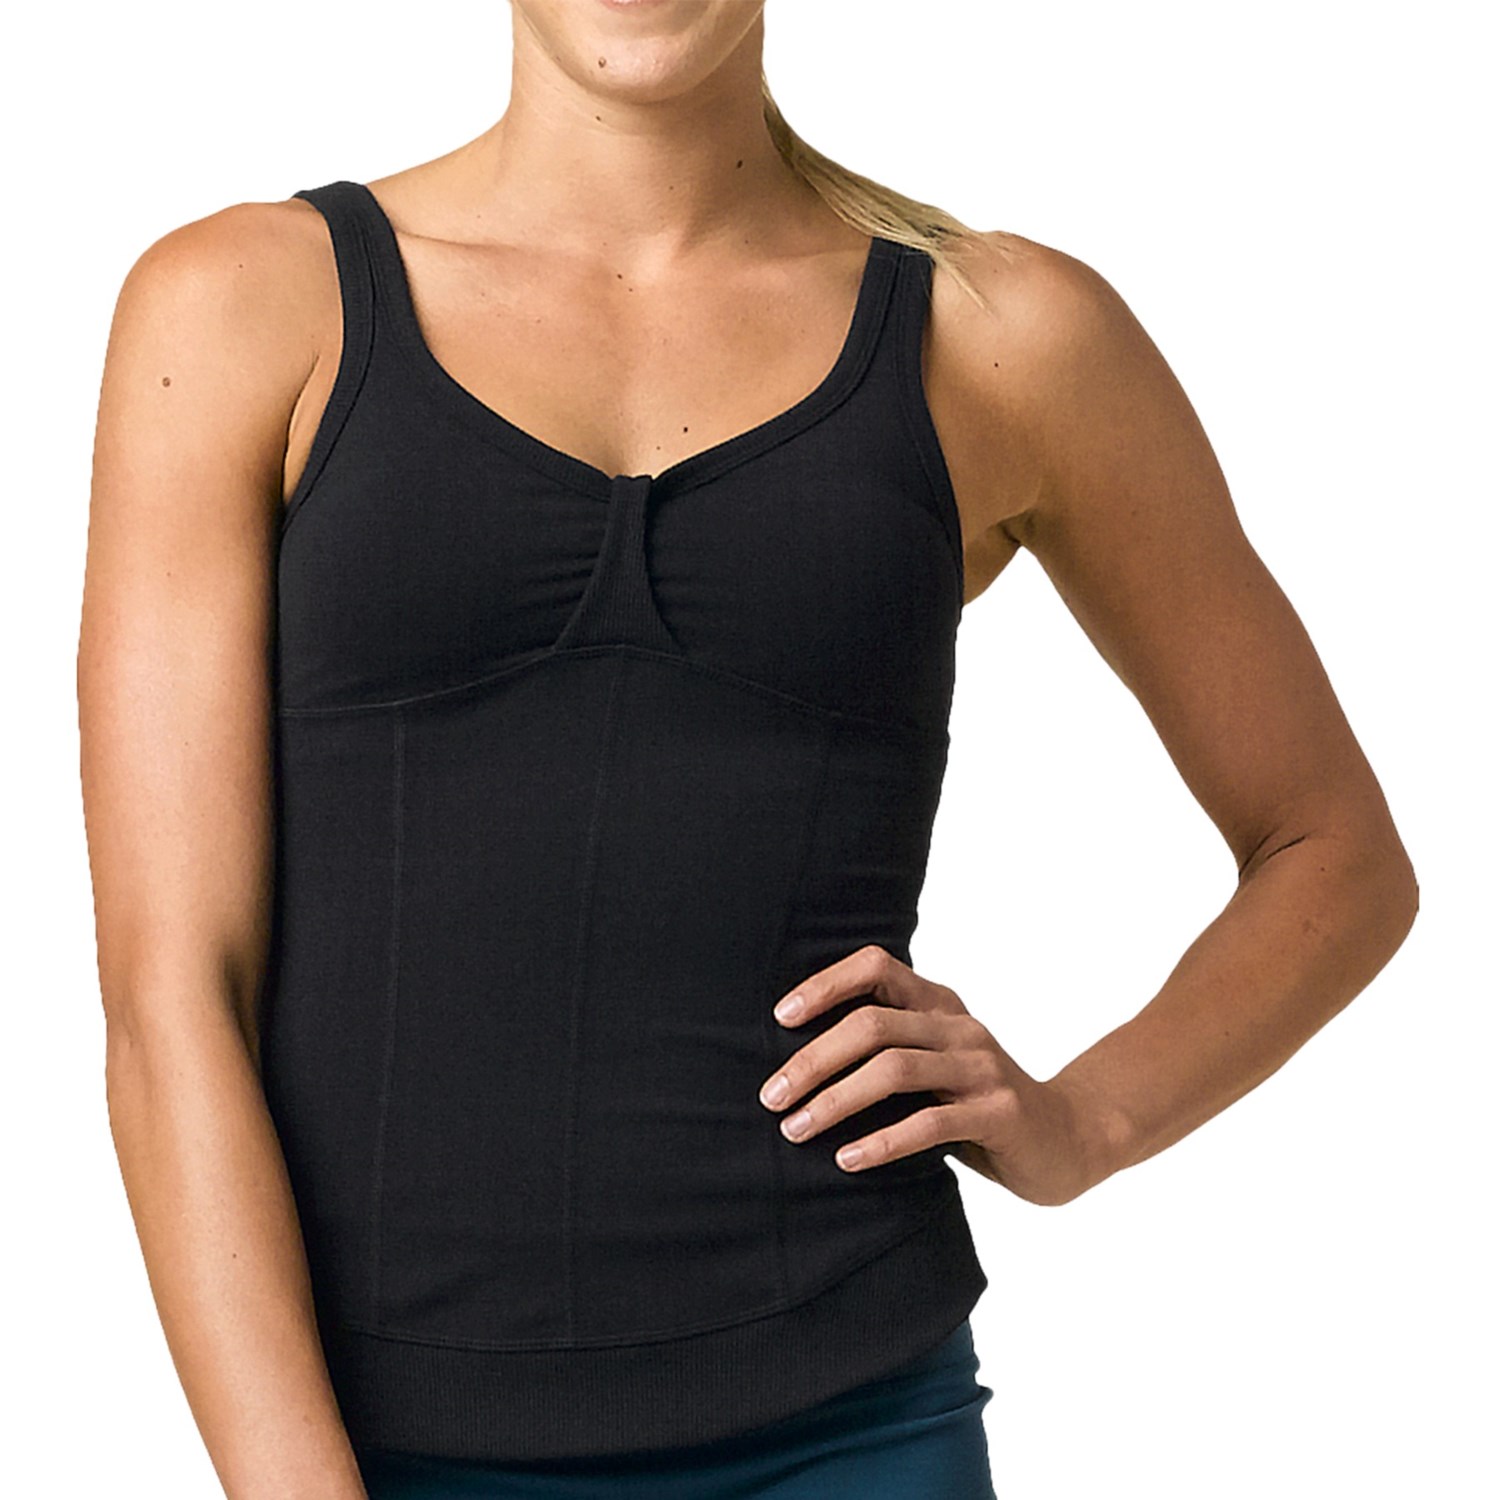 List 101+ Background Images High Neck Workout Tank With Built-in Bra Latest